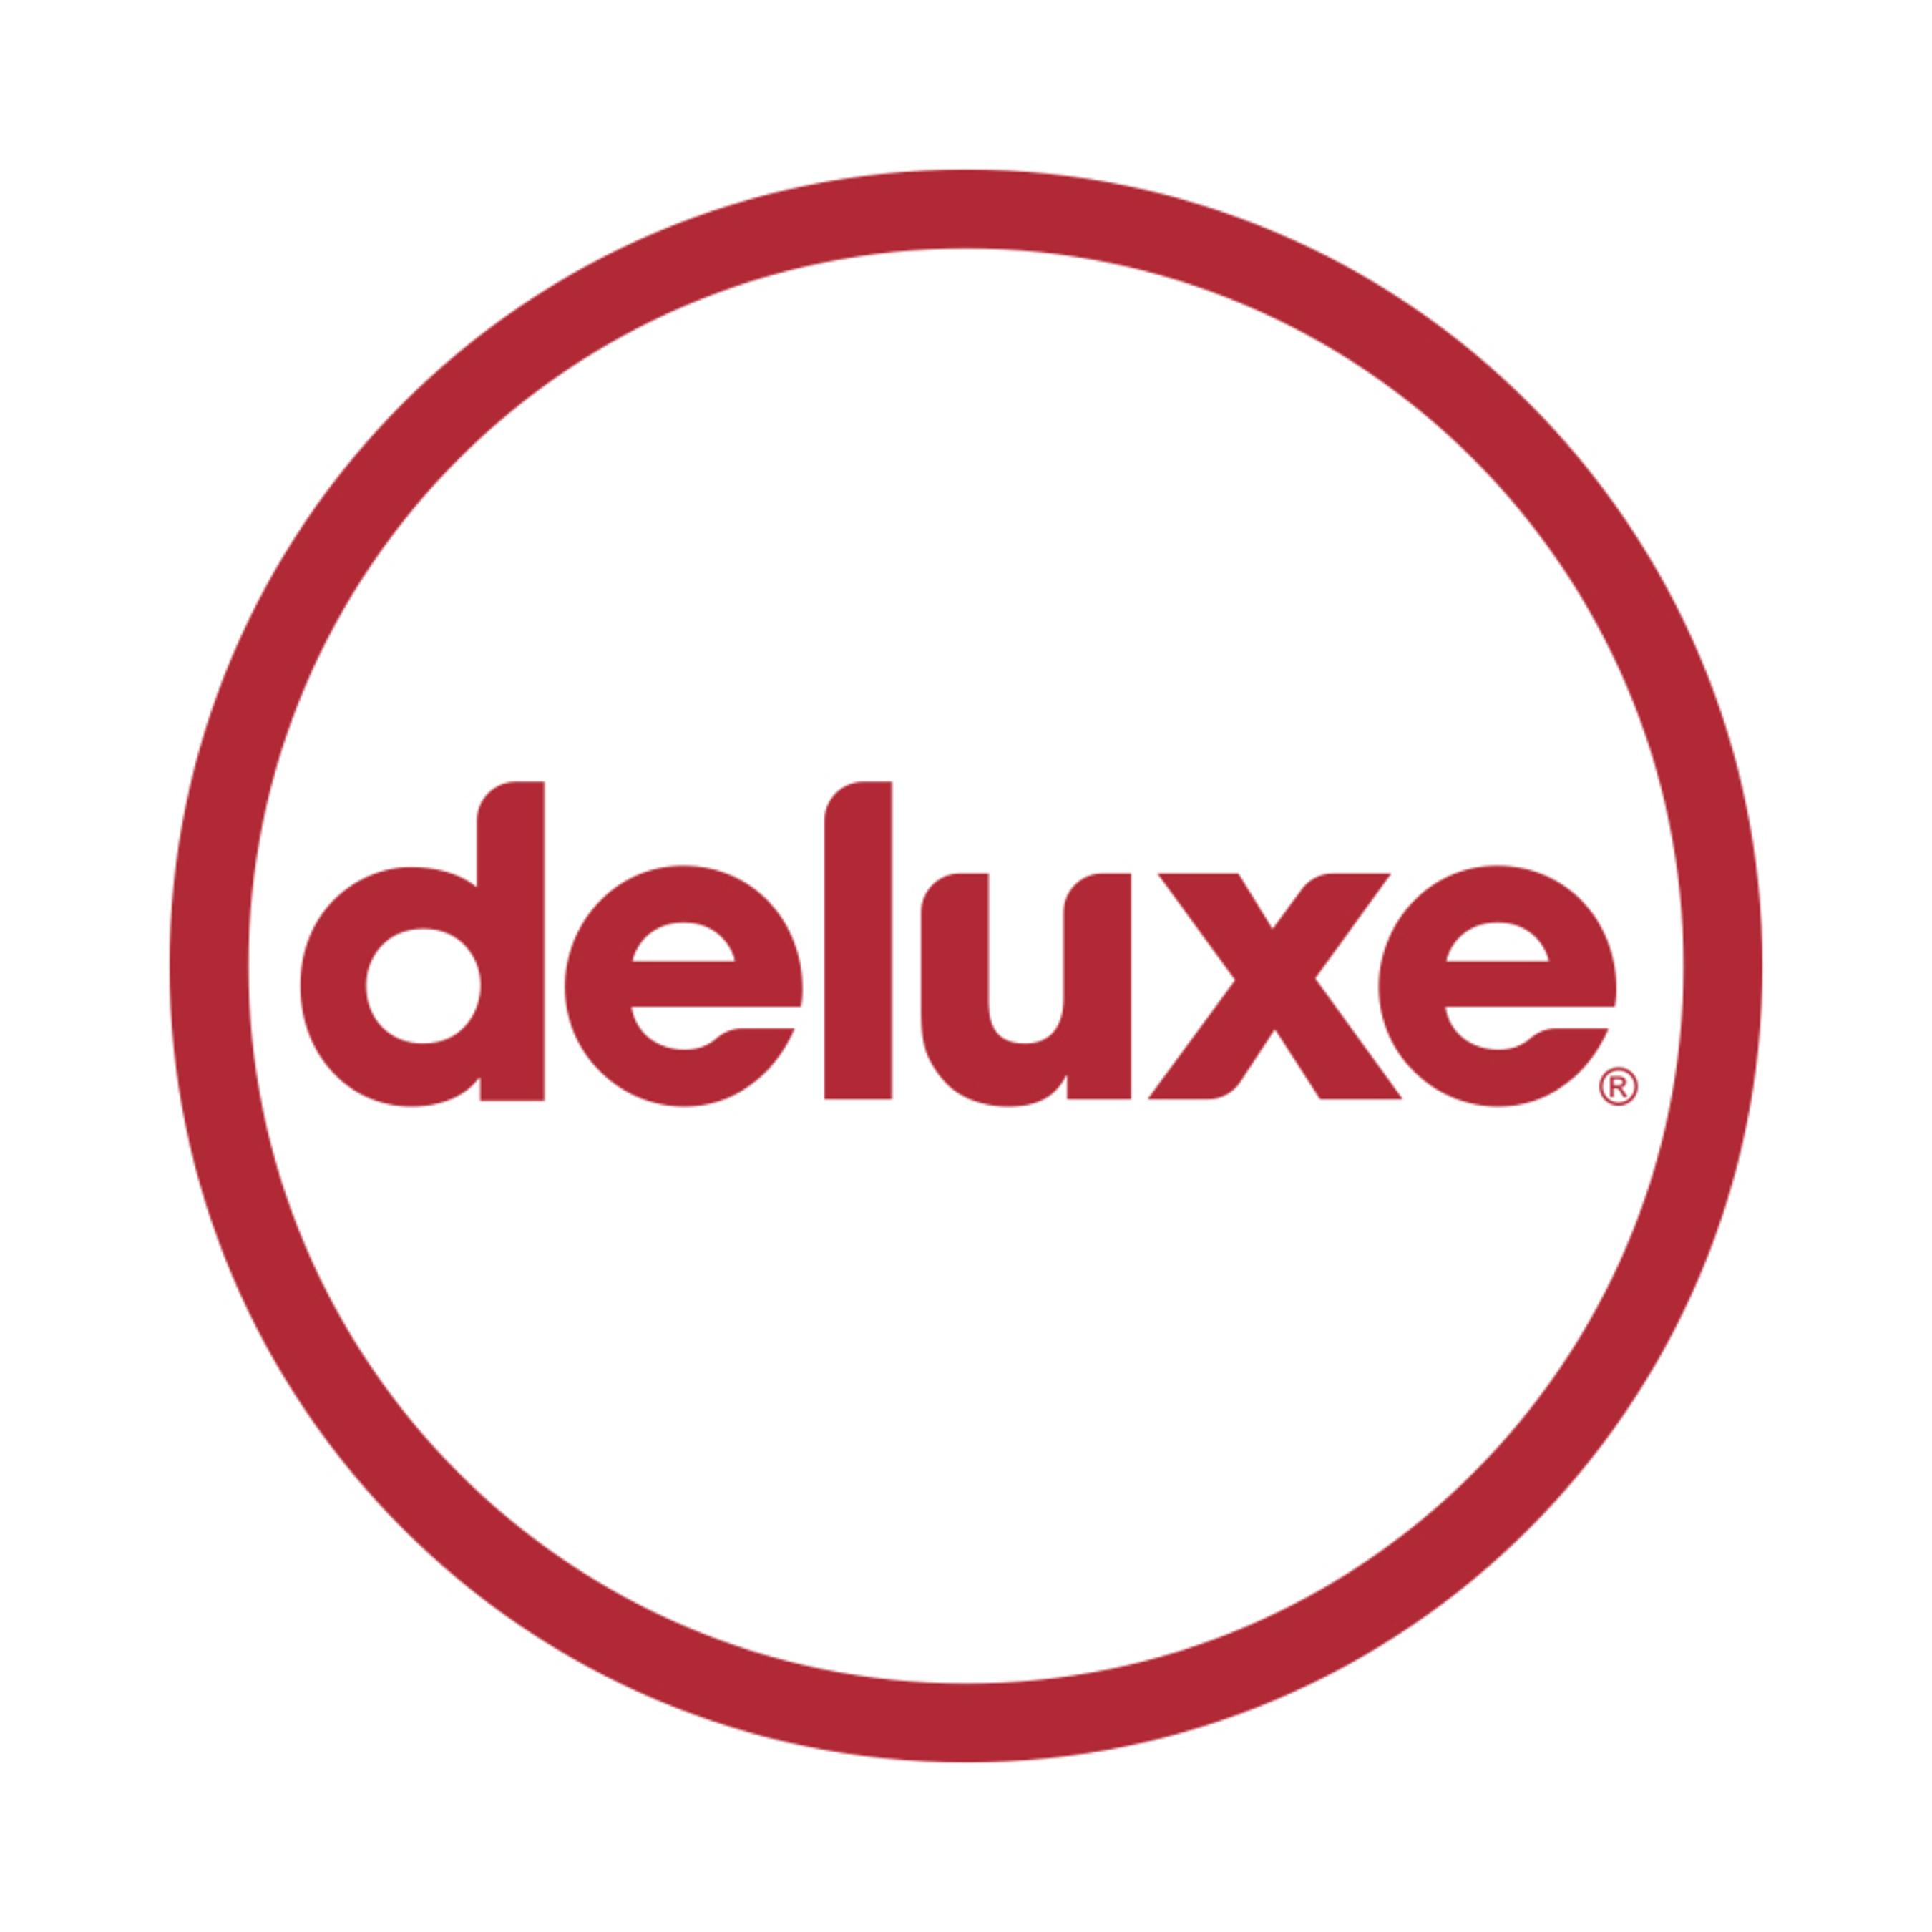 Deluxe Entertainment Services Group Inc. is a global leader in media and entertainment services for film, video and online content, from capture to consumption.